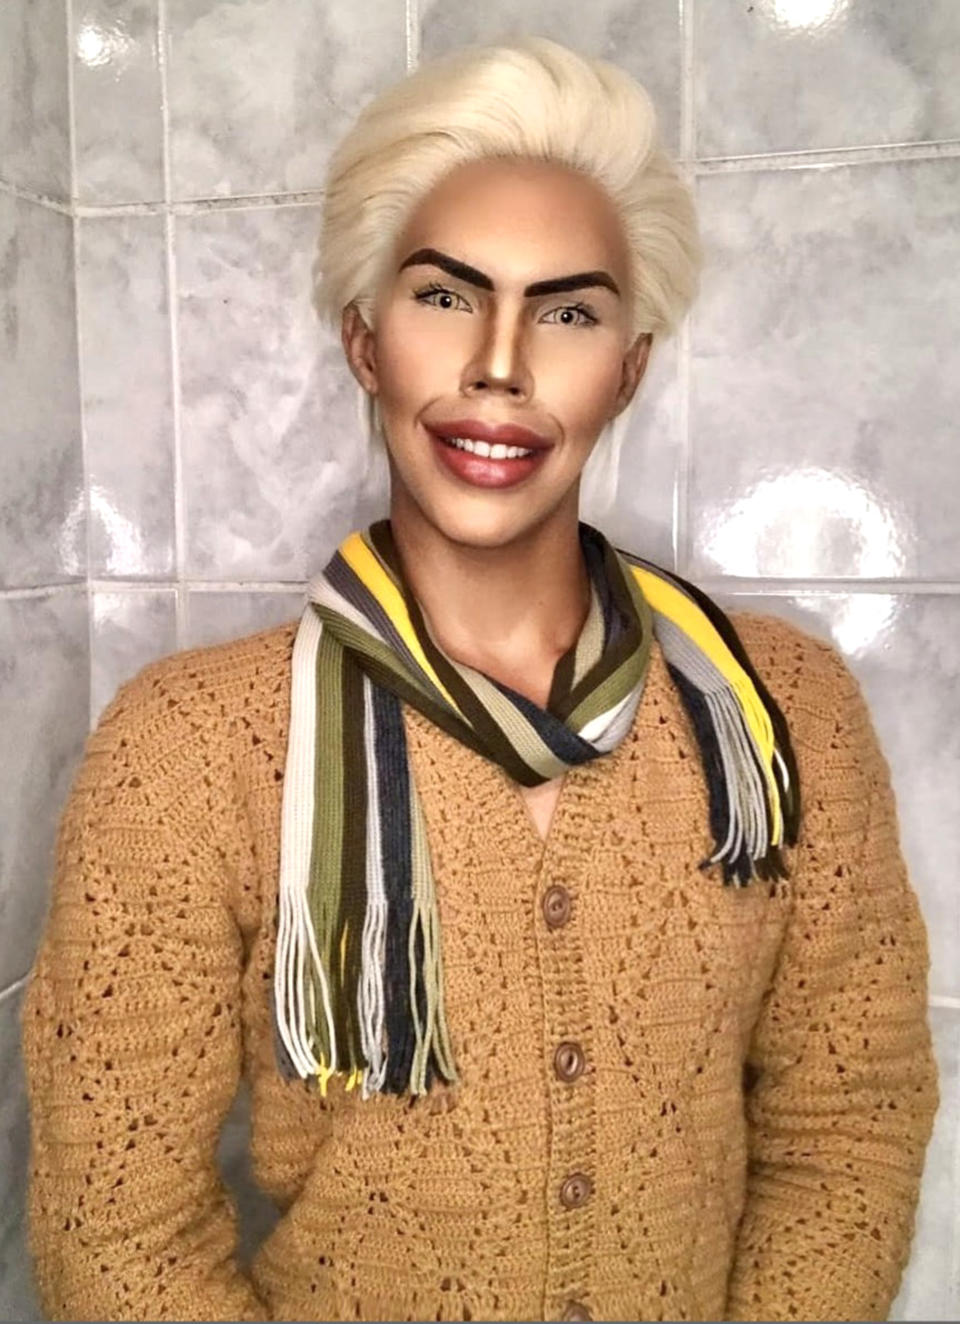  A 17-year-old boy spends four hours per day applying makeup to look like his favourite doll, Ken 